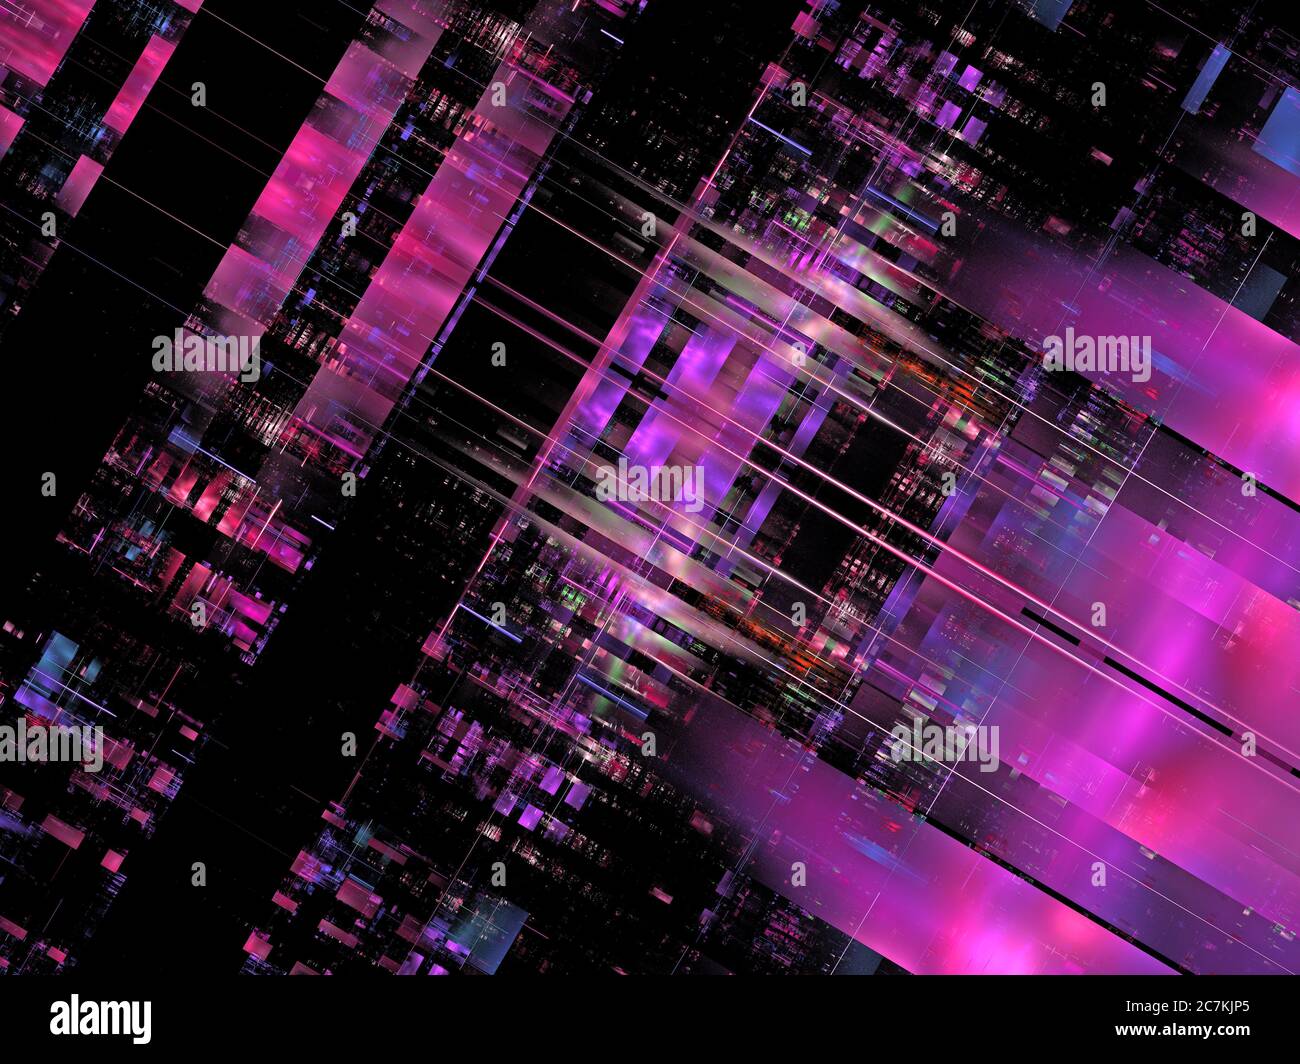 3 dimensional graphic design structures for the subjects of technology, communications, digital information Stock Photo